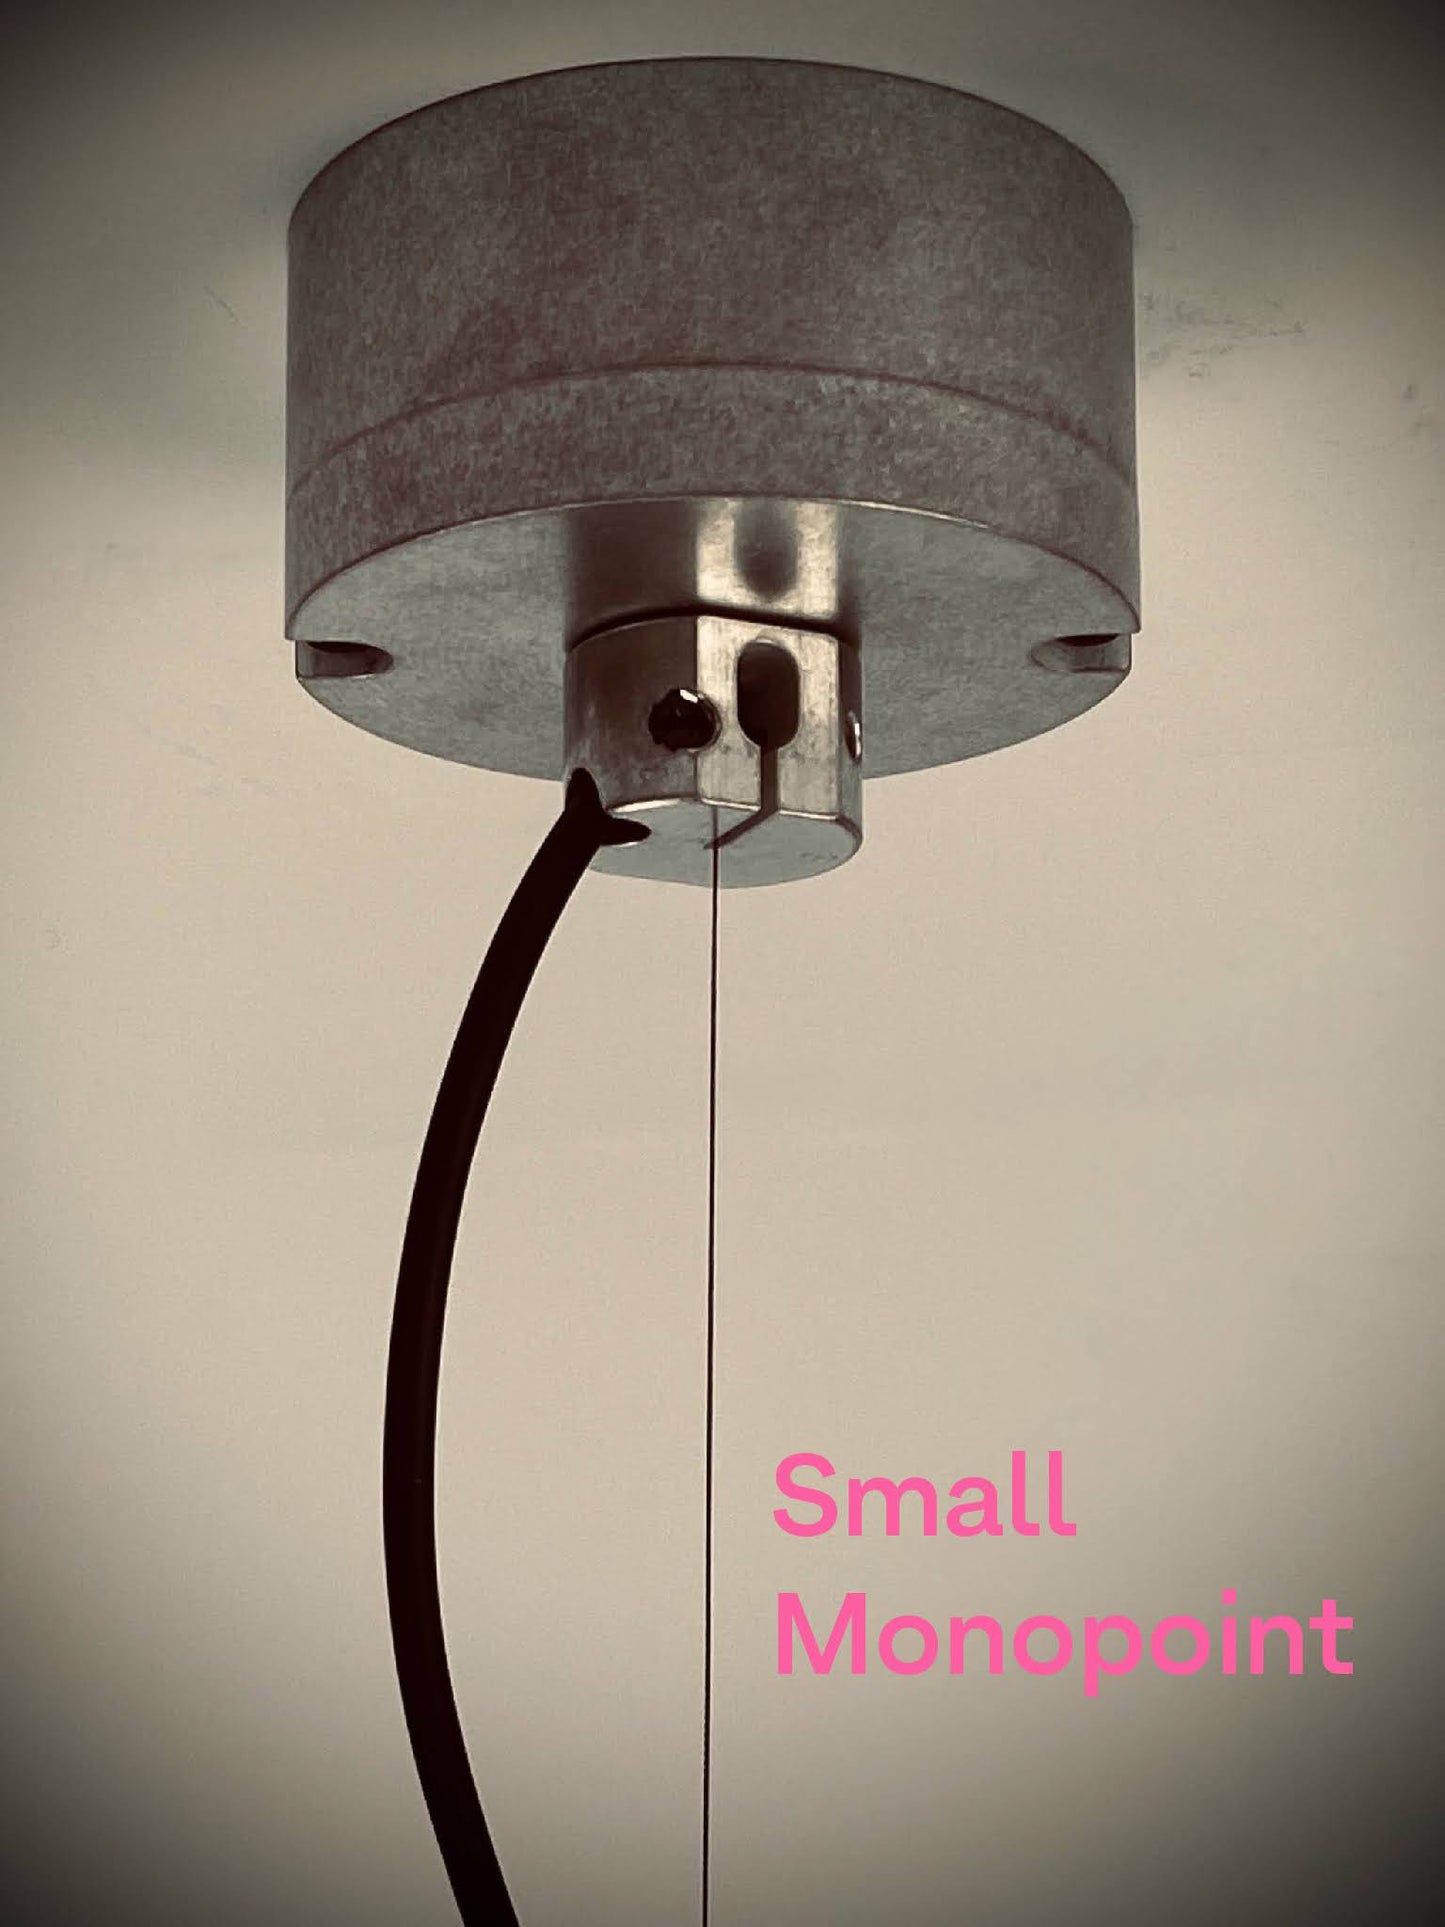 Installed small monopoint for a sustainable architectural pendant that was designed for circular economy